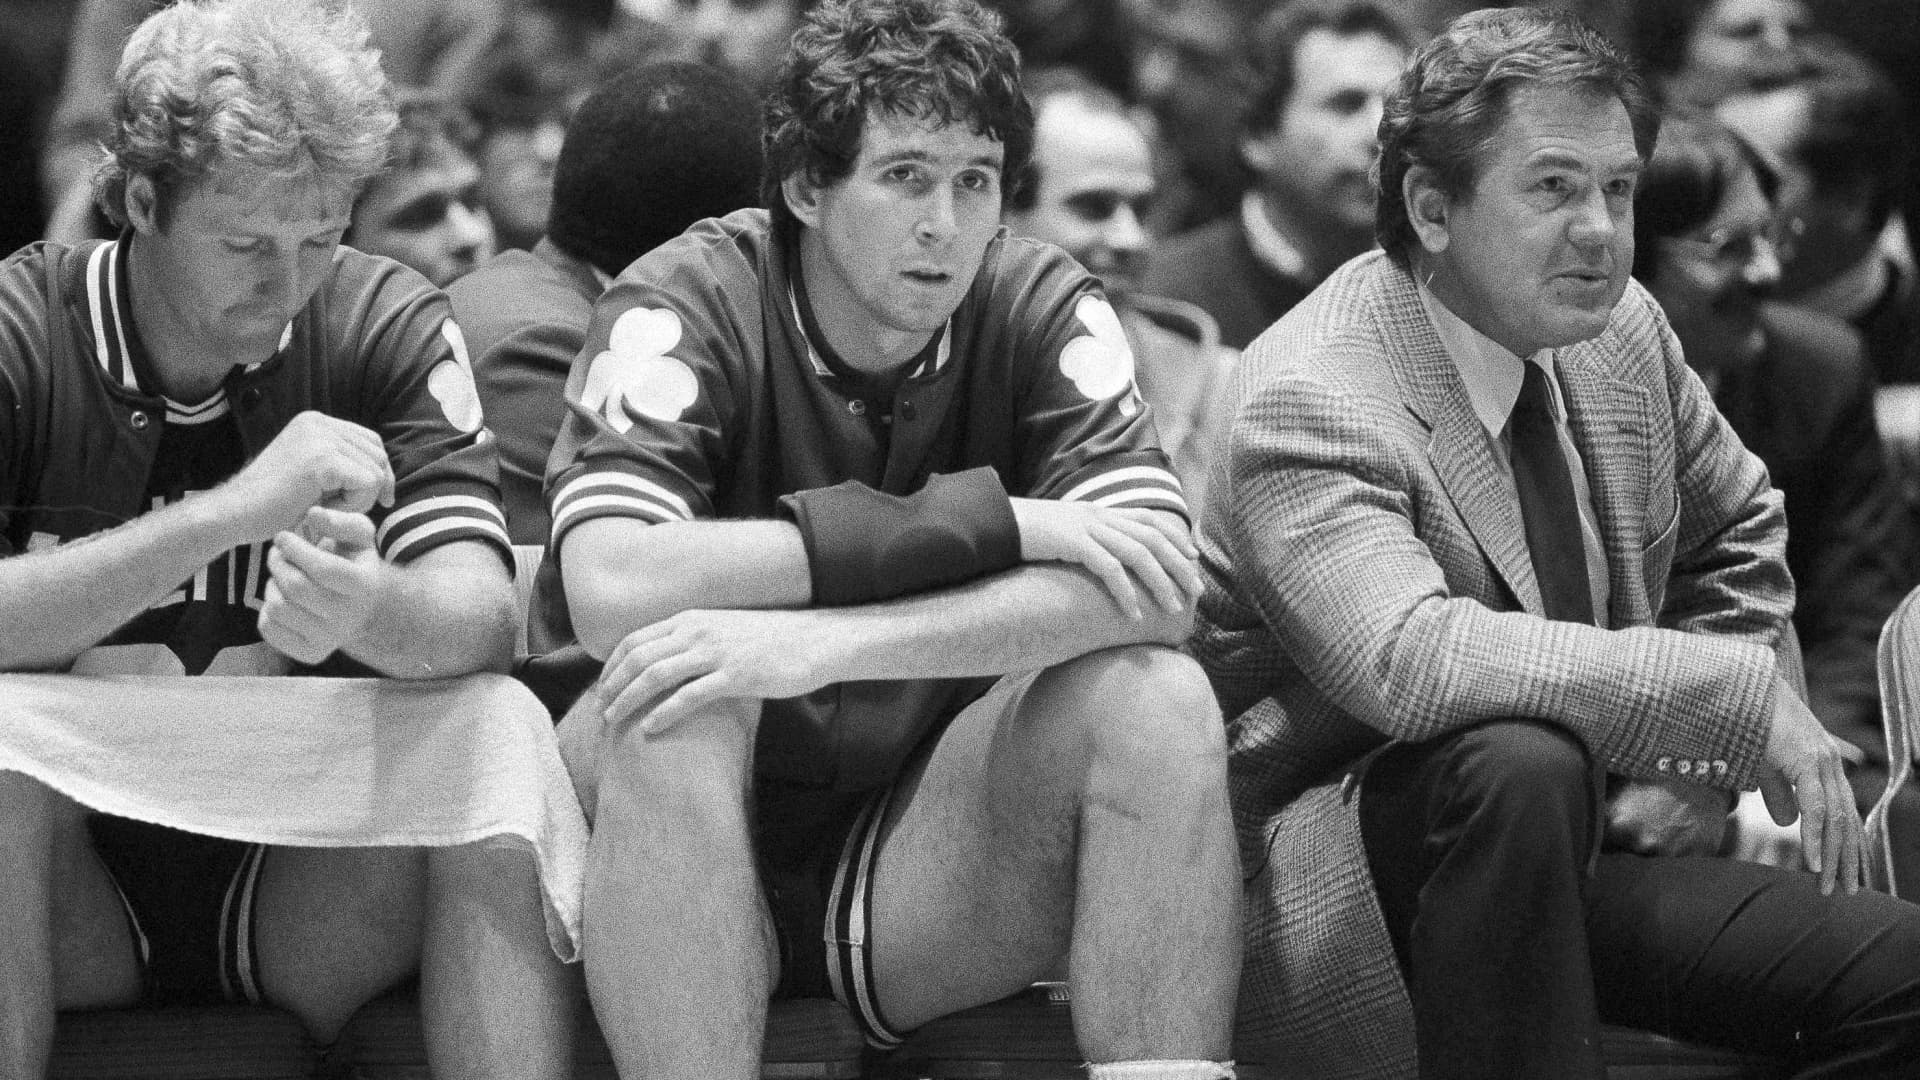 Hall of Fame coach Bill Fitch dies, led Celtics to '81 title